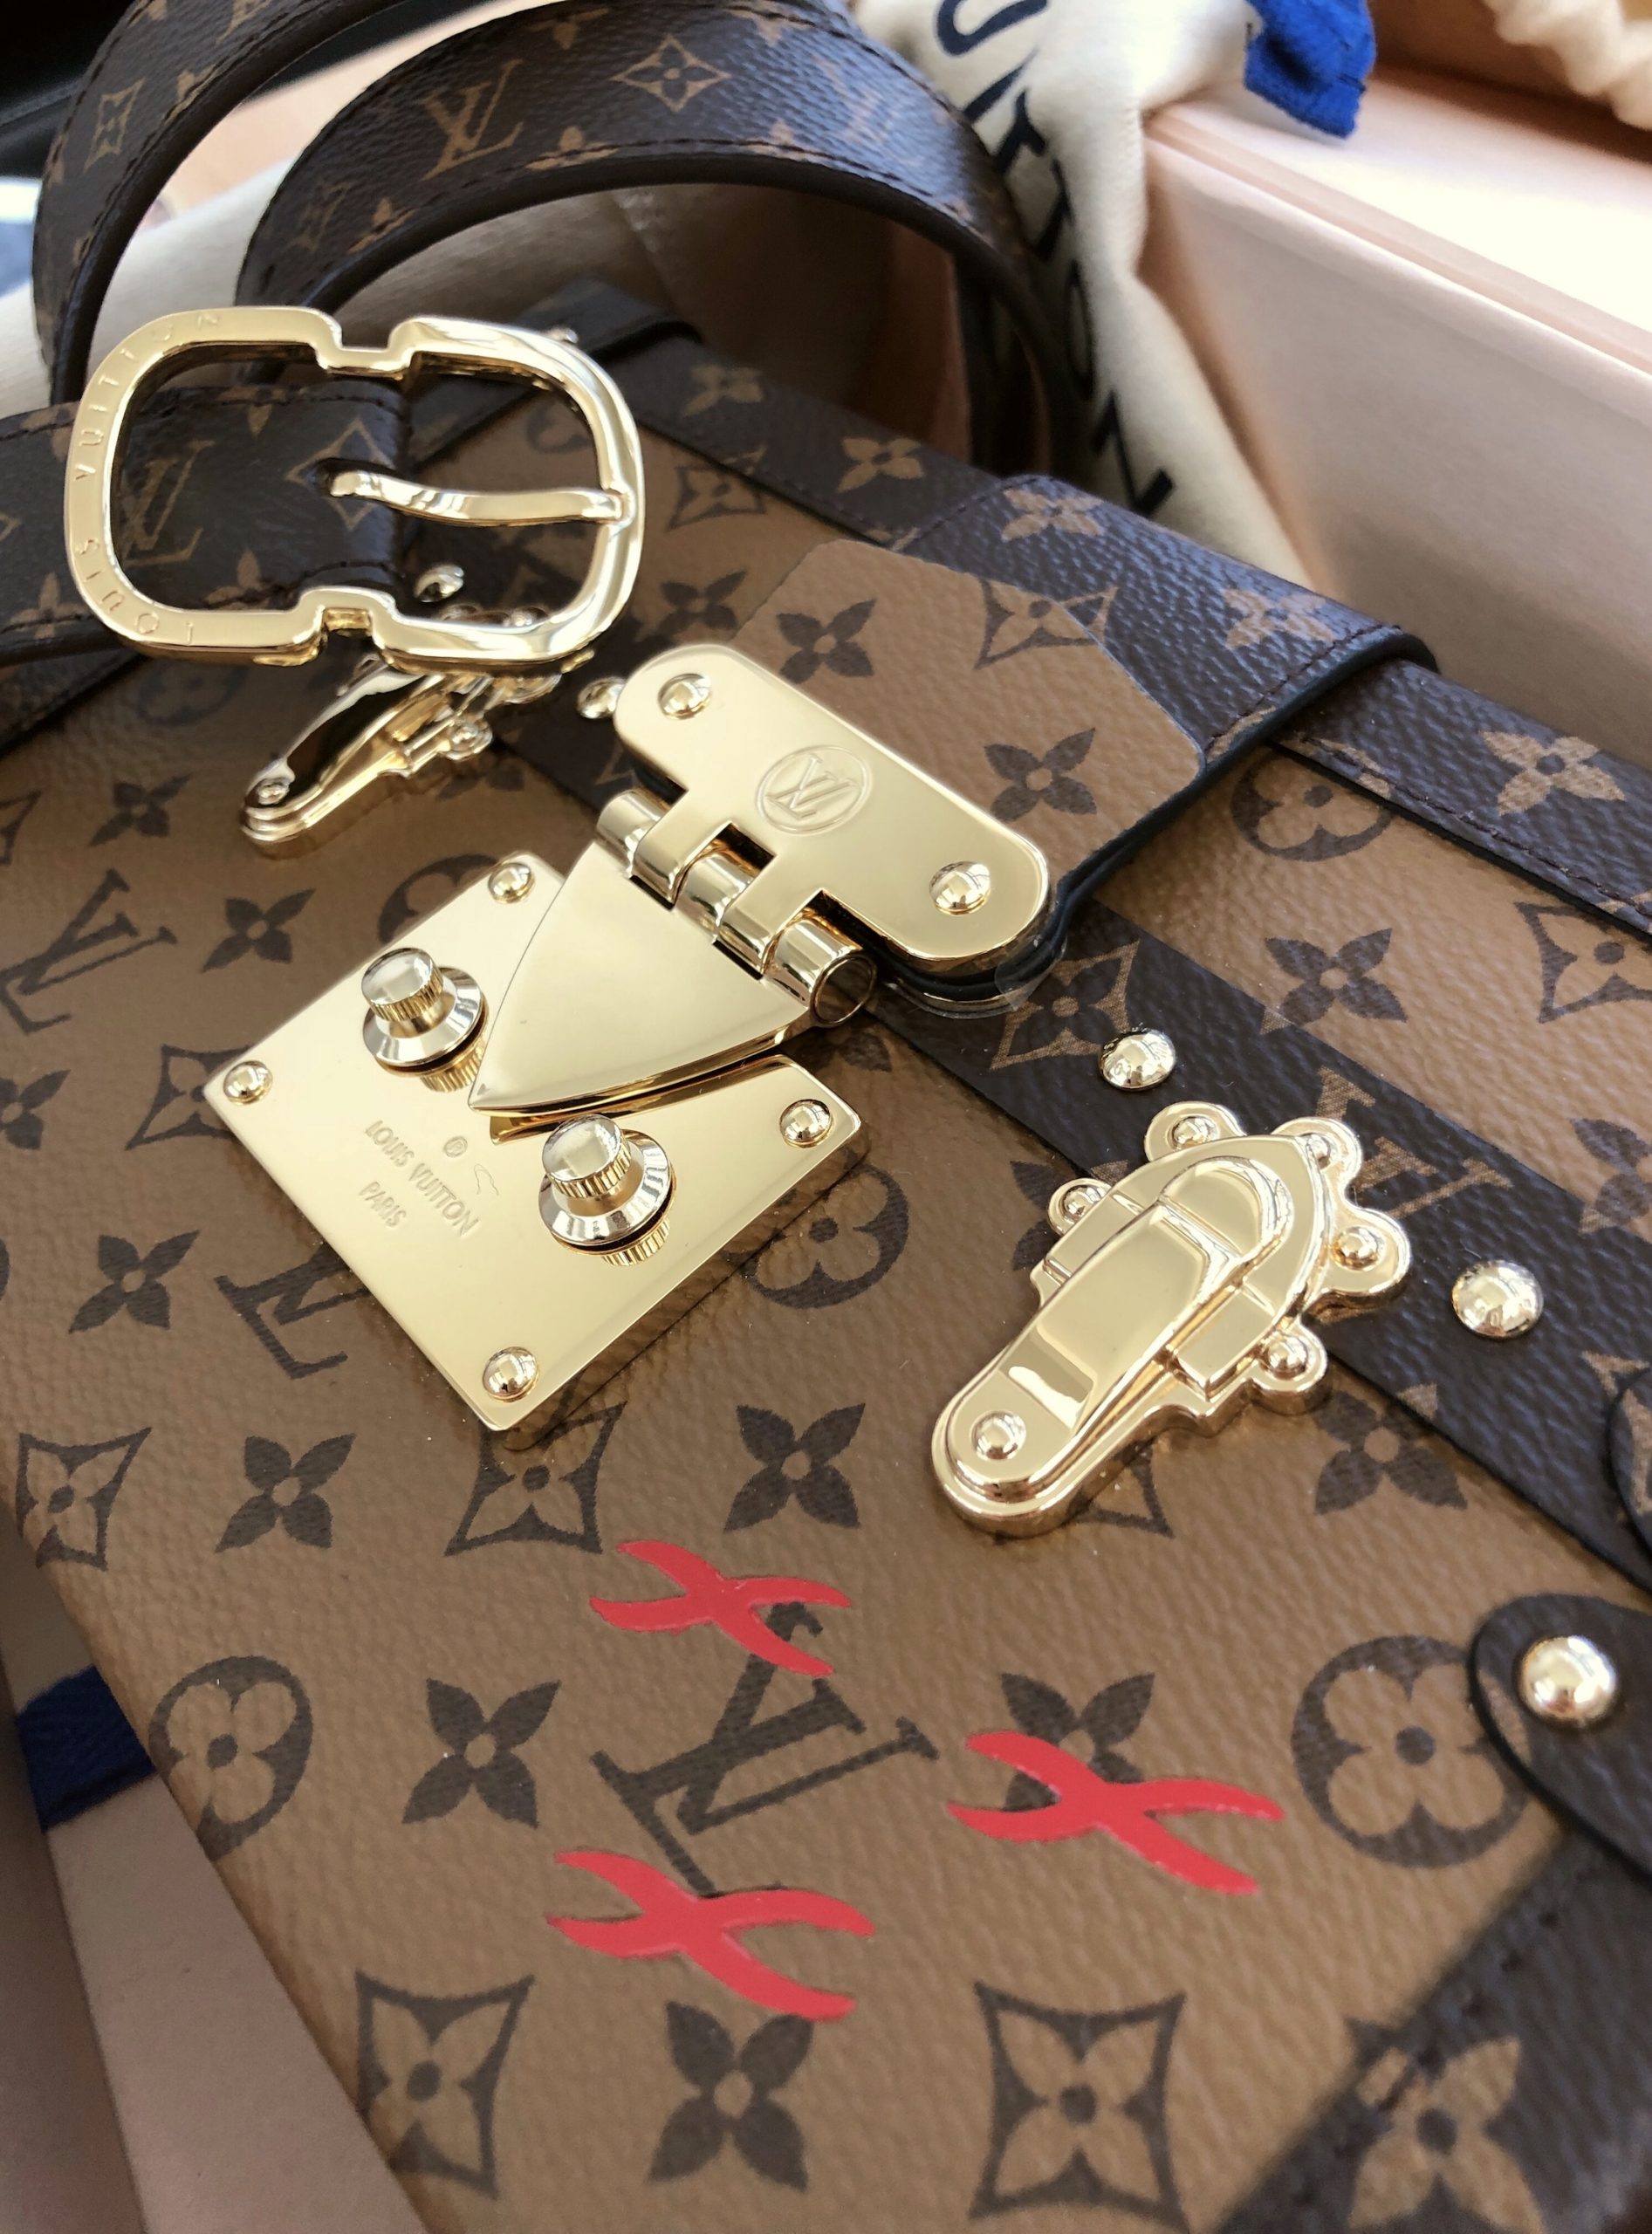 Louis Vuitton: Going Huge on the Petite Malle